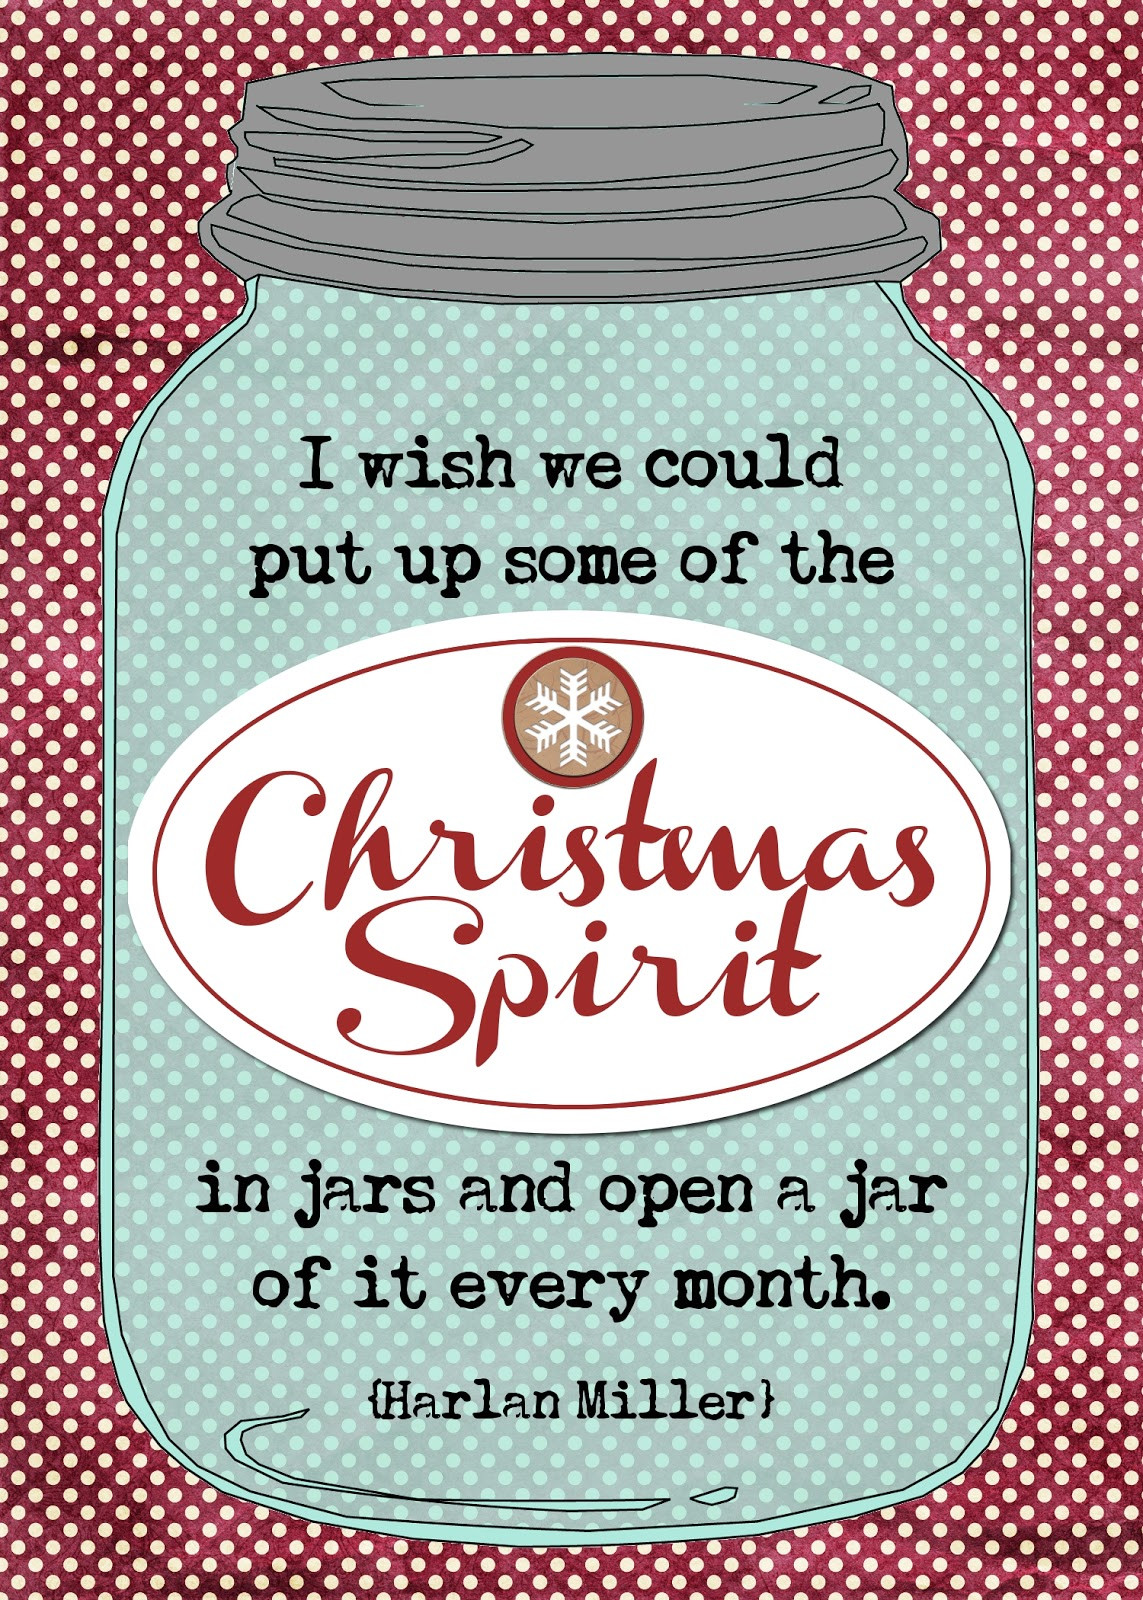 Cute Christmas Quotes For Cards
 Cute Christmas Quotes QuotesGram